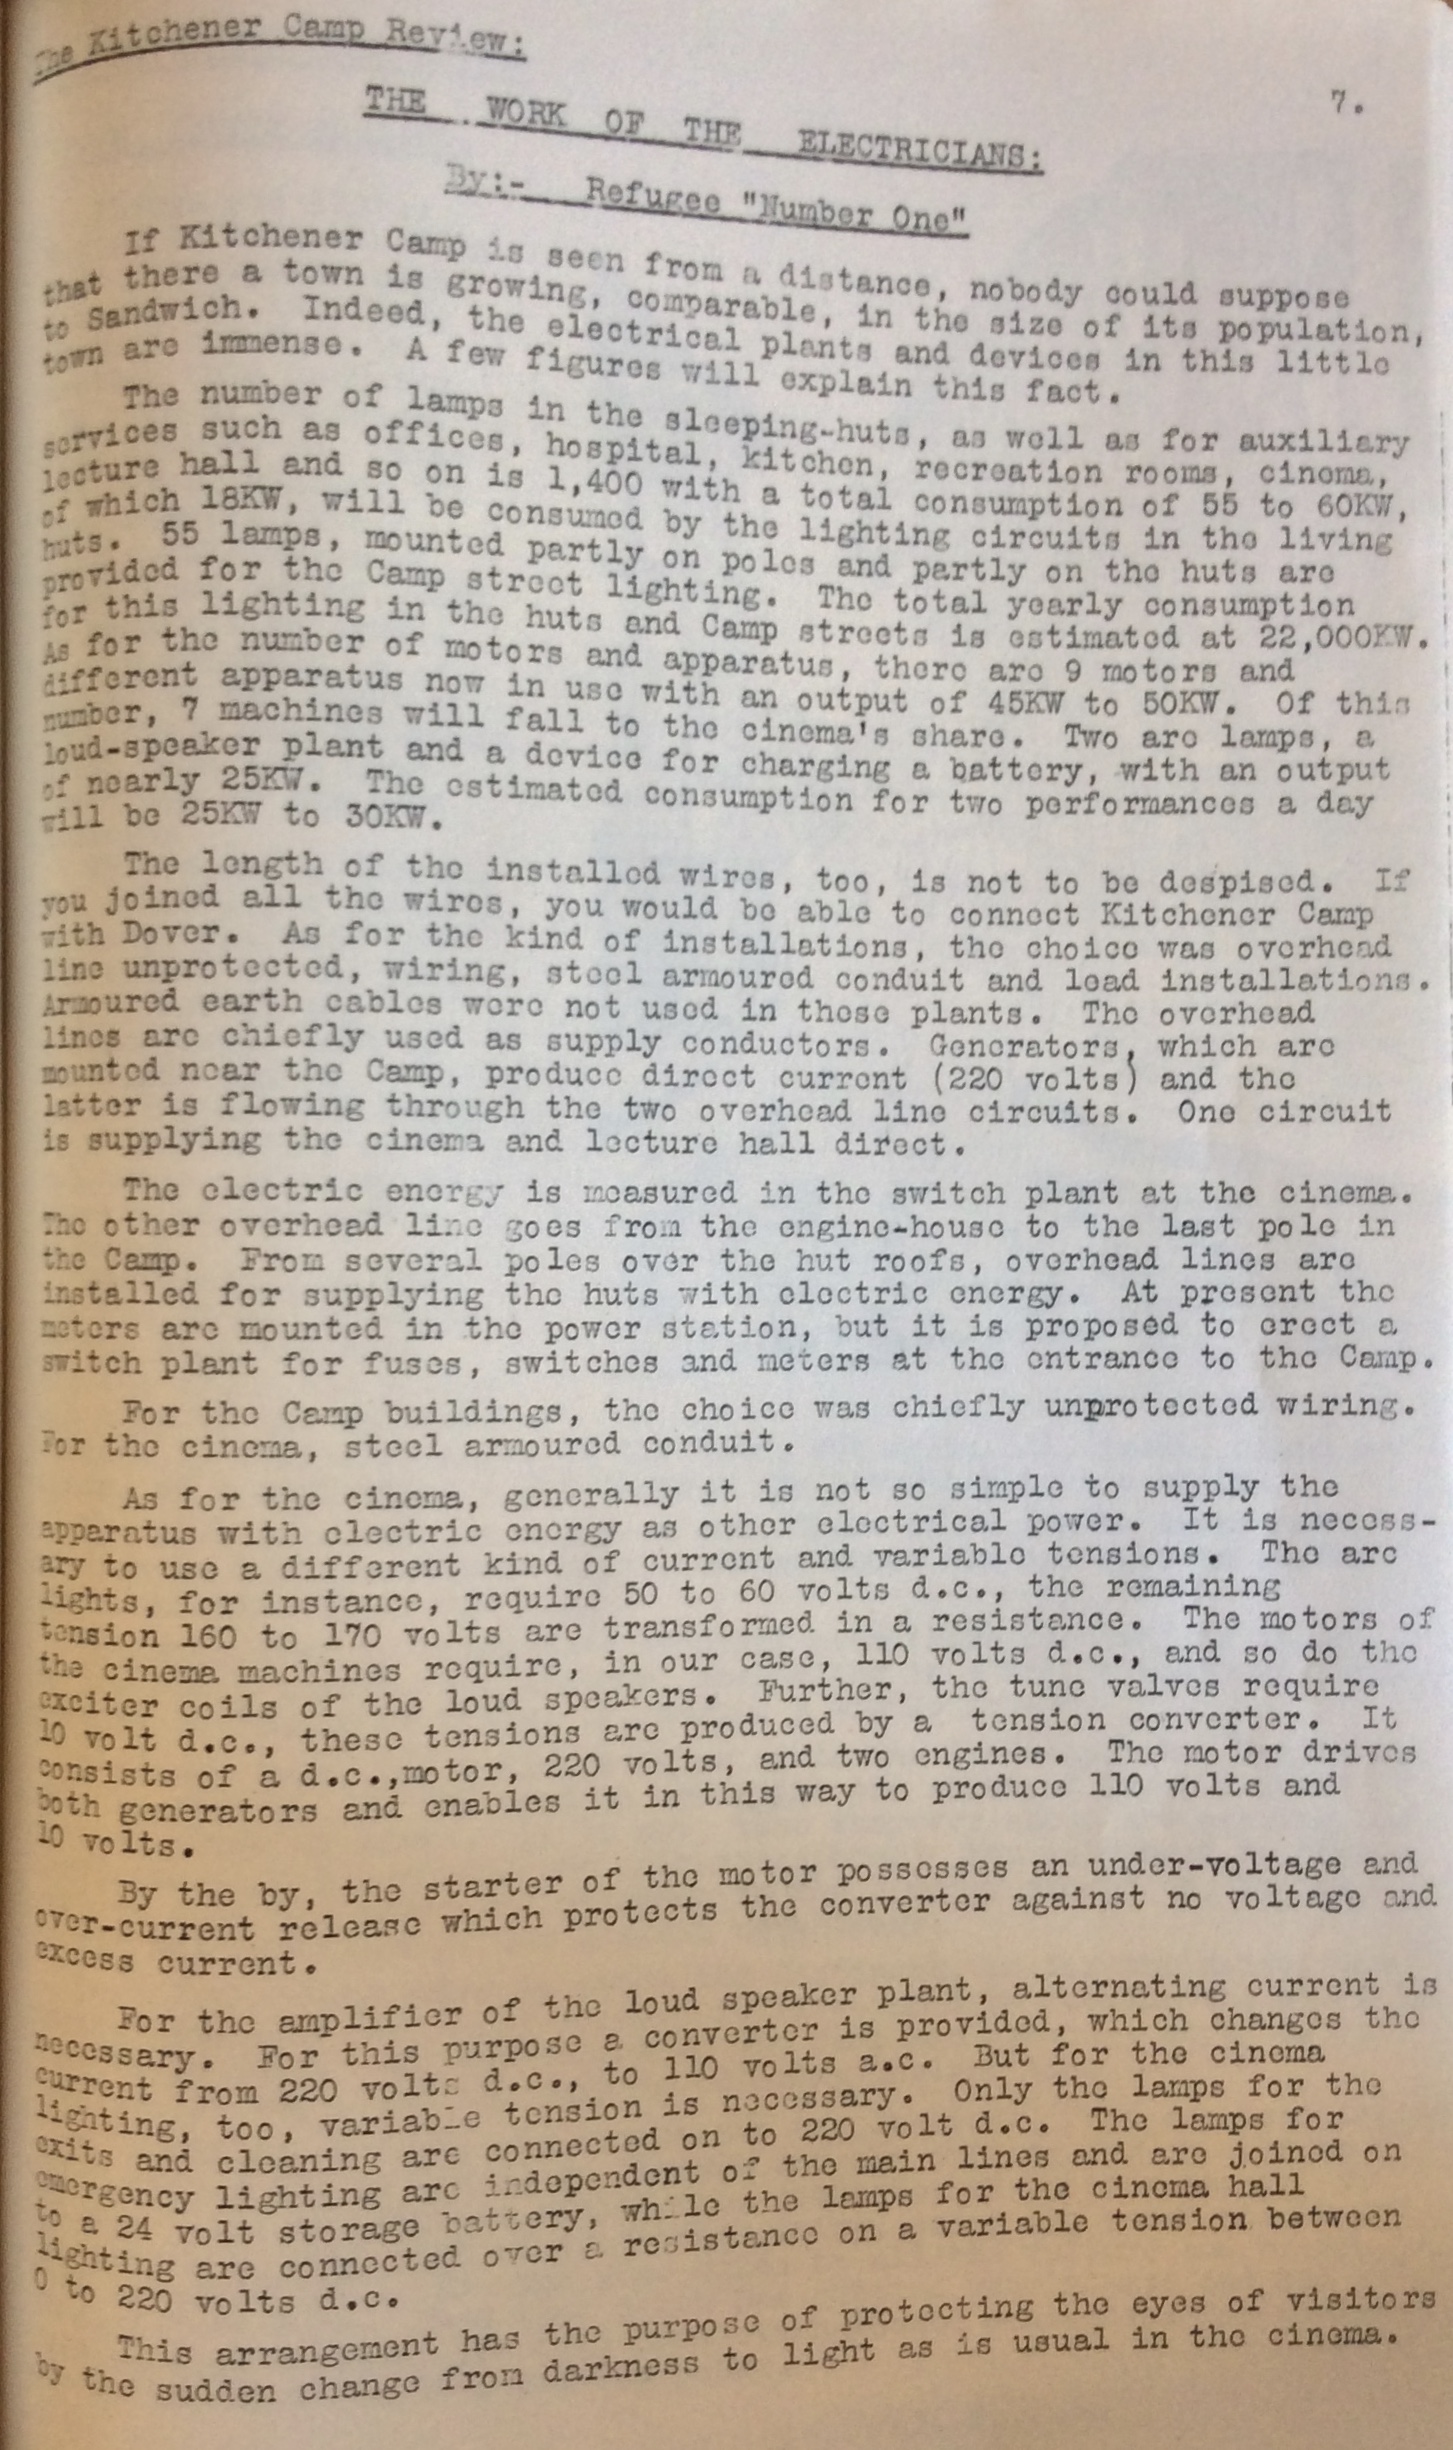 The Kitchener Camp Review, July 1939, No. 5, page 7